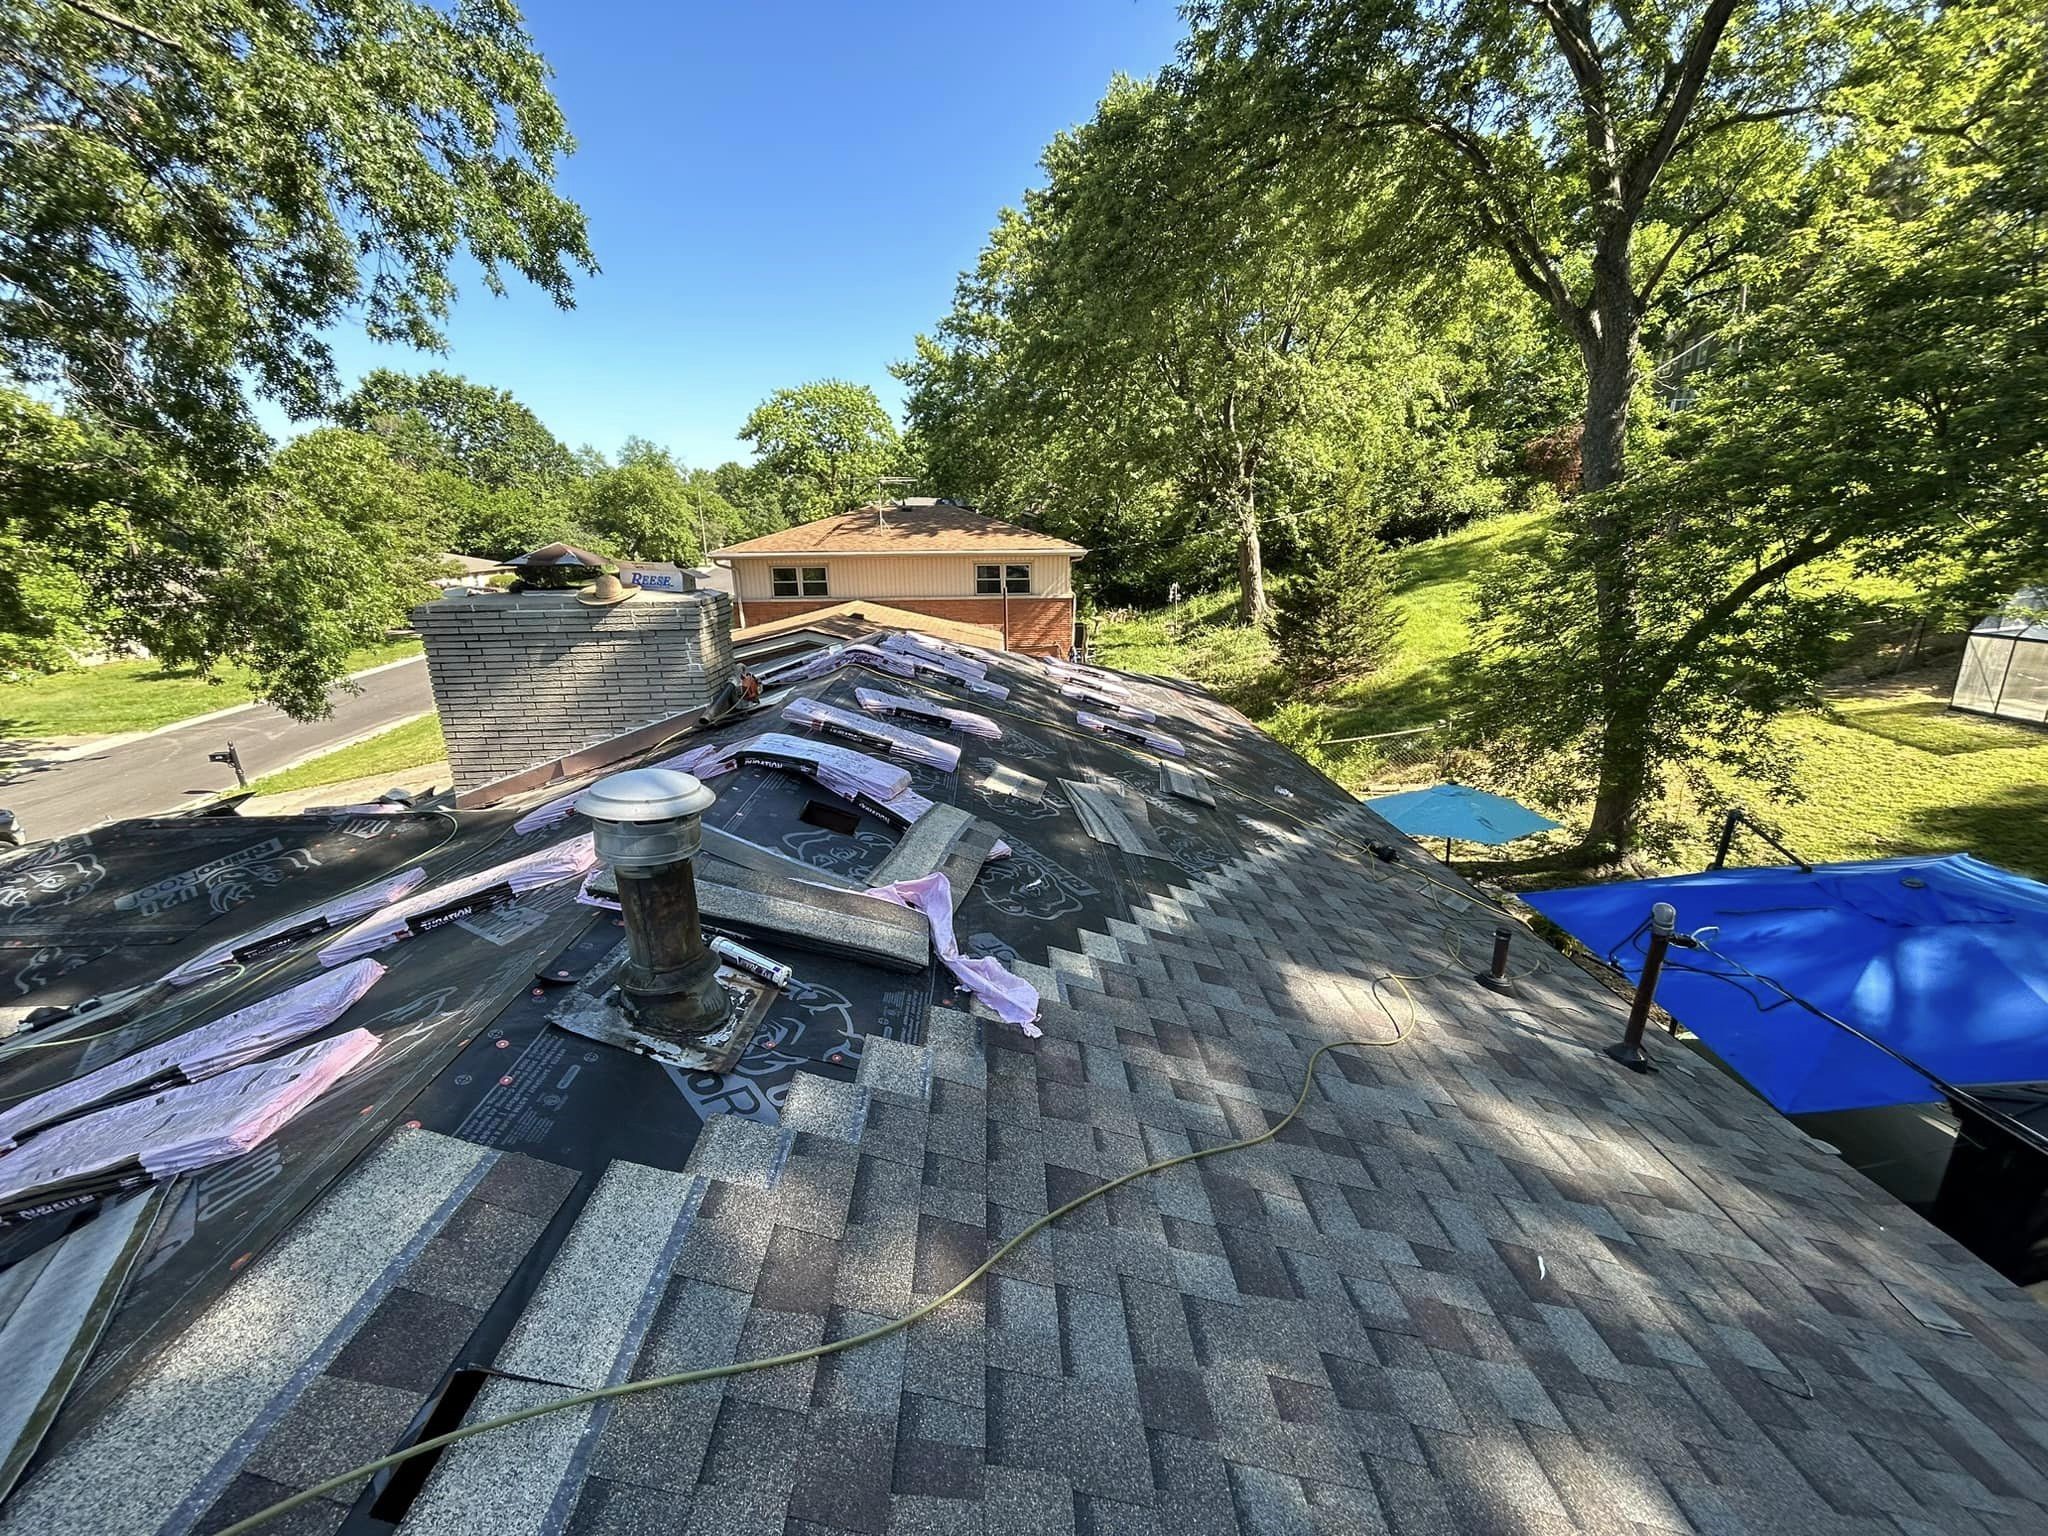 JT Roofs Sets New Standard in Quality: Introducing Premium Roofing Services to the Community